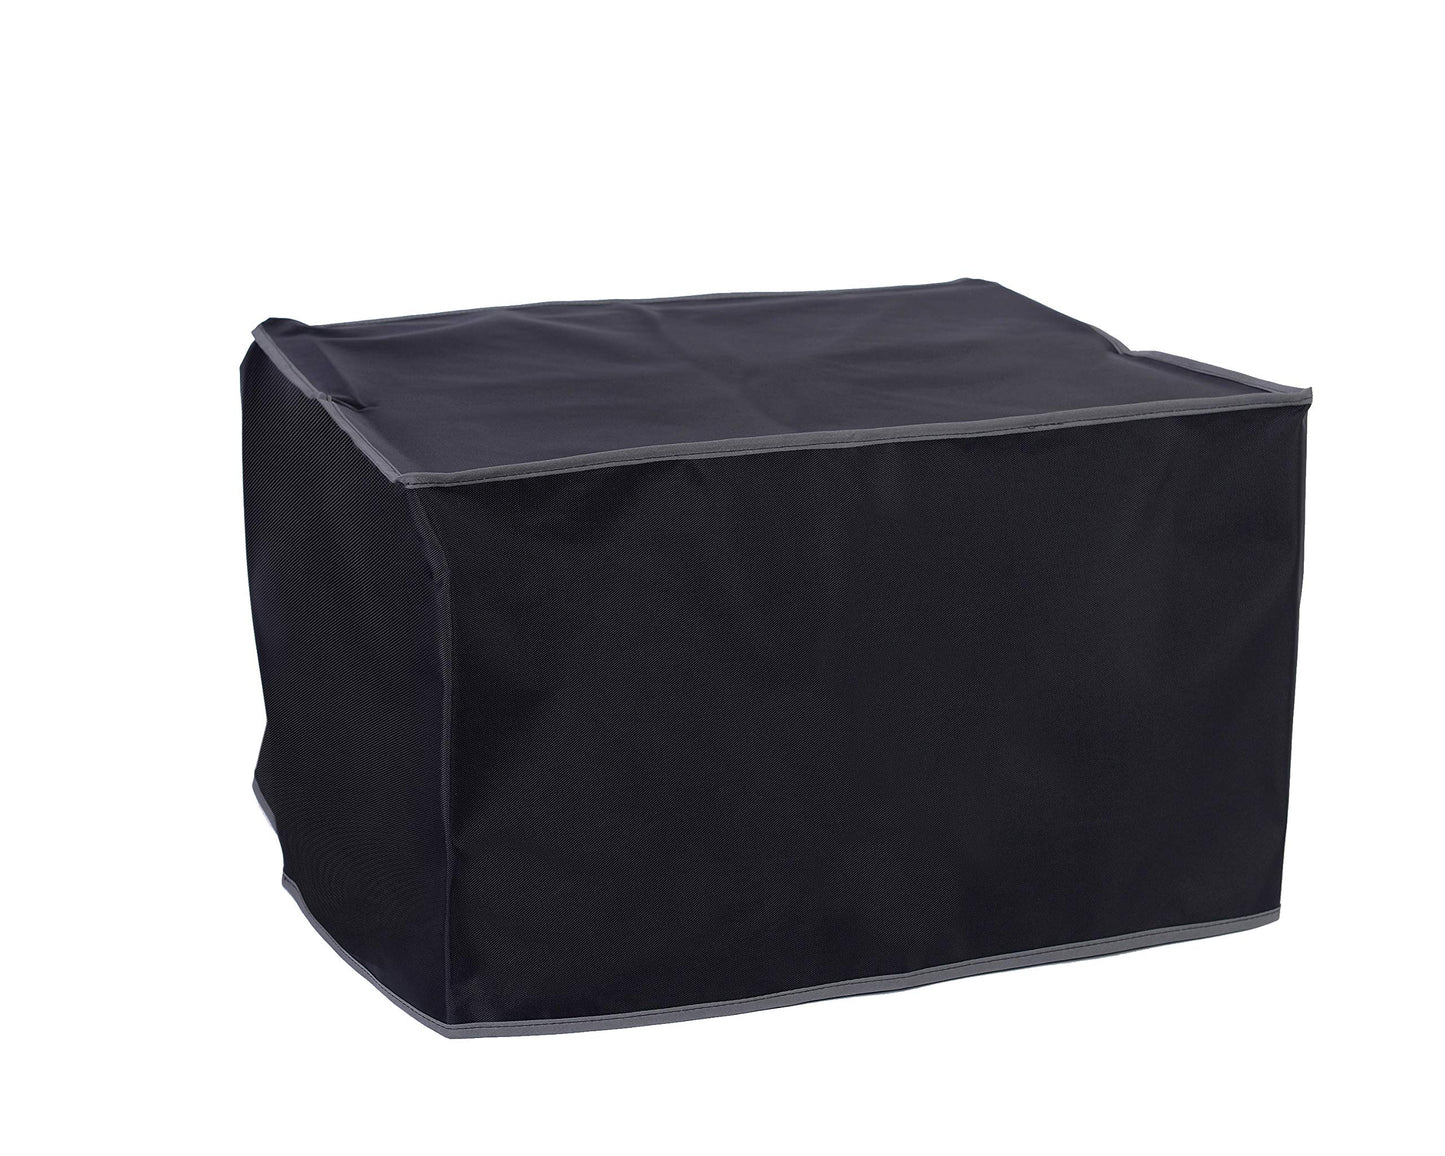 The Perfect Dust Cover, Black Nylon Cover for Epson EcoTank ET-4700 All-in-One Printer, Anti Static and Waterproof Cover Dimensions 14.8''W x 13.7''D x 9.3''H by The Perfect Dust Cover LLC